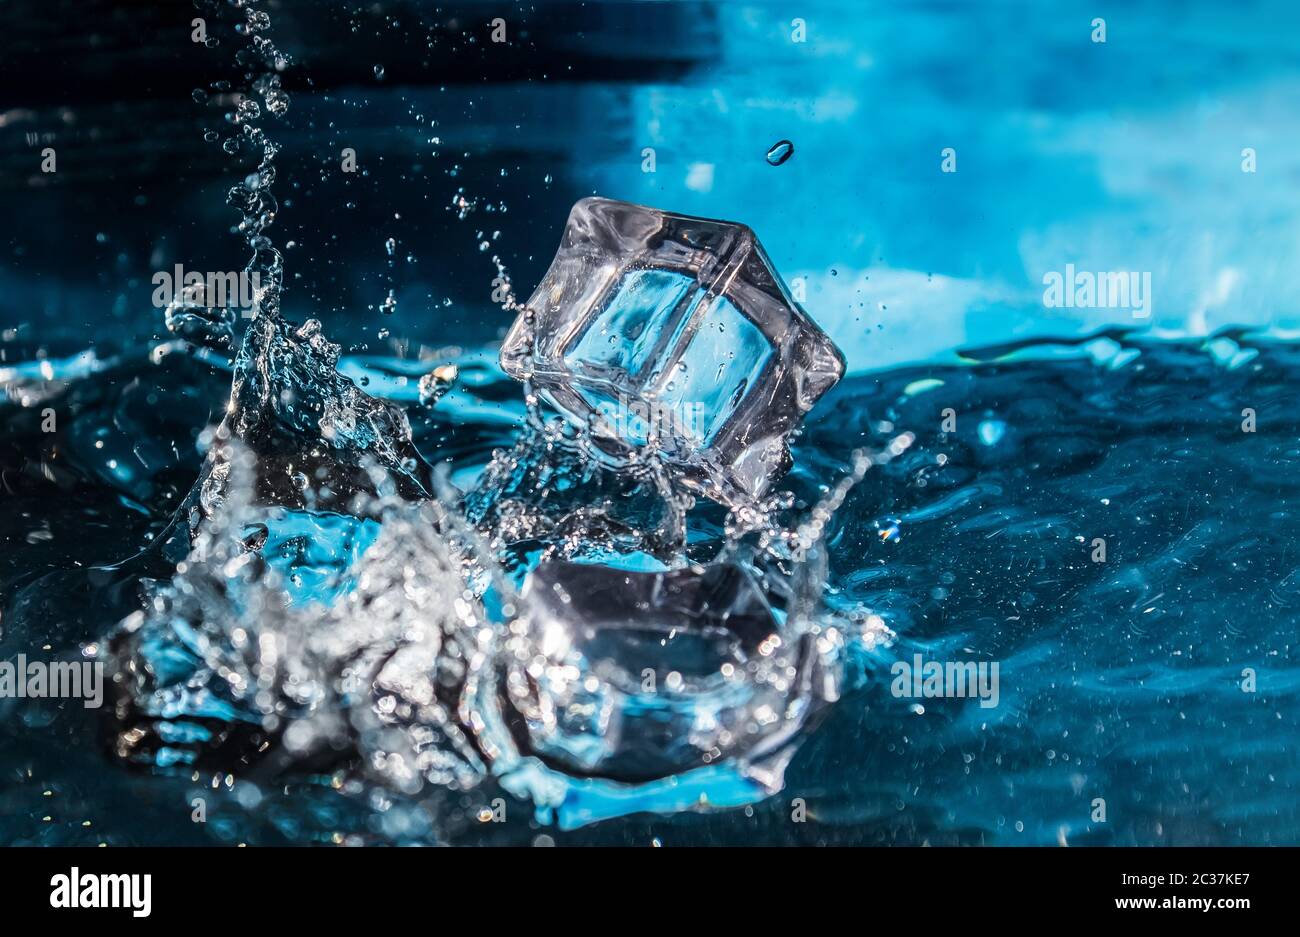 https://c8.alamy.com/comp/2C37KE7/ice-cubes-falling-into-the-blue-water-splash-of-ice-water-water-splashes-from-falling-ice-cubes-2C37KE7.jpg